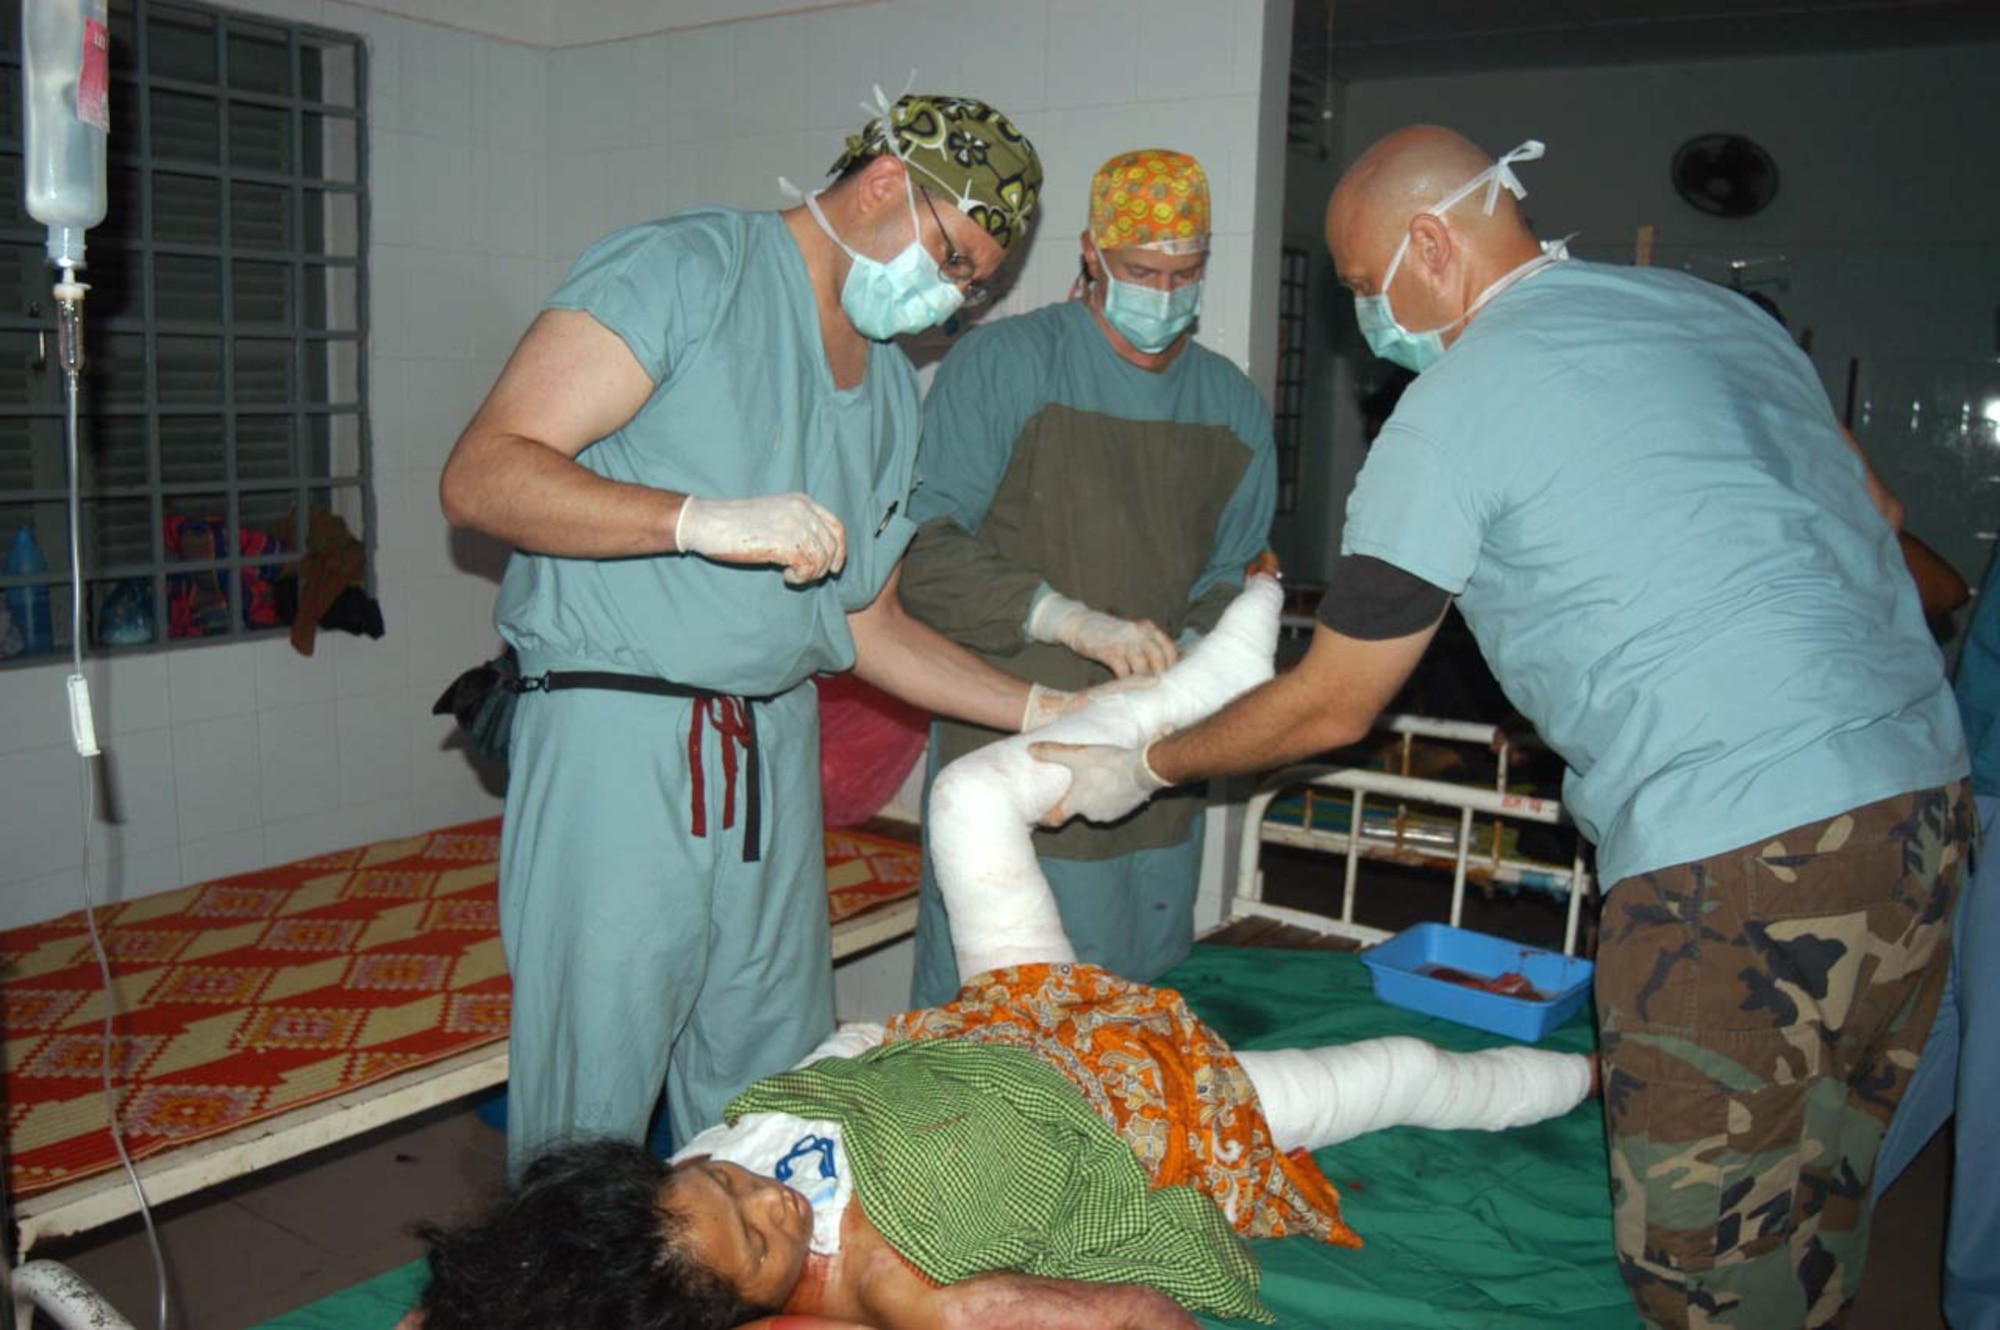 KEP, Cambodia - (From left) Capt. (Dr.) Jason Rosenberg, Lt. Col. (Dr.) Jim Walter and Master Sgt. Kristopher Krenzke bandage a burn patient's legs May 20 at a hospital compound here.  All three Airmen are part of a 20-member blast resuscitation and victim assistance mission.  (U.S. Air Force photo by Master Sgt. Adam Johnston)